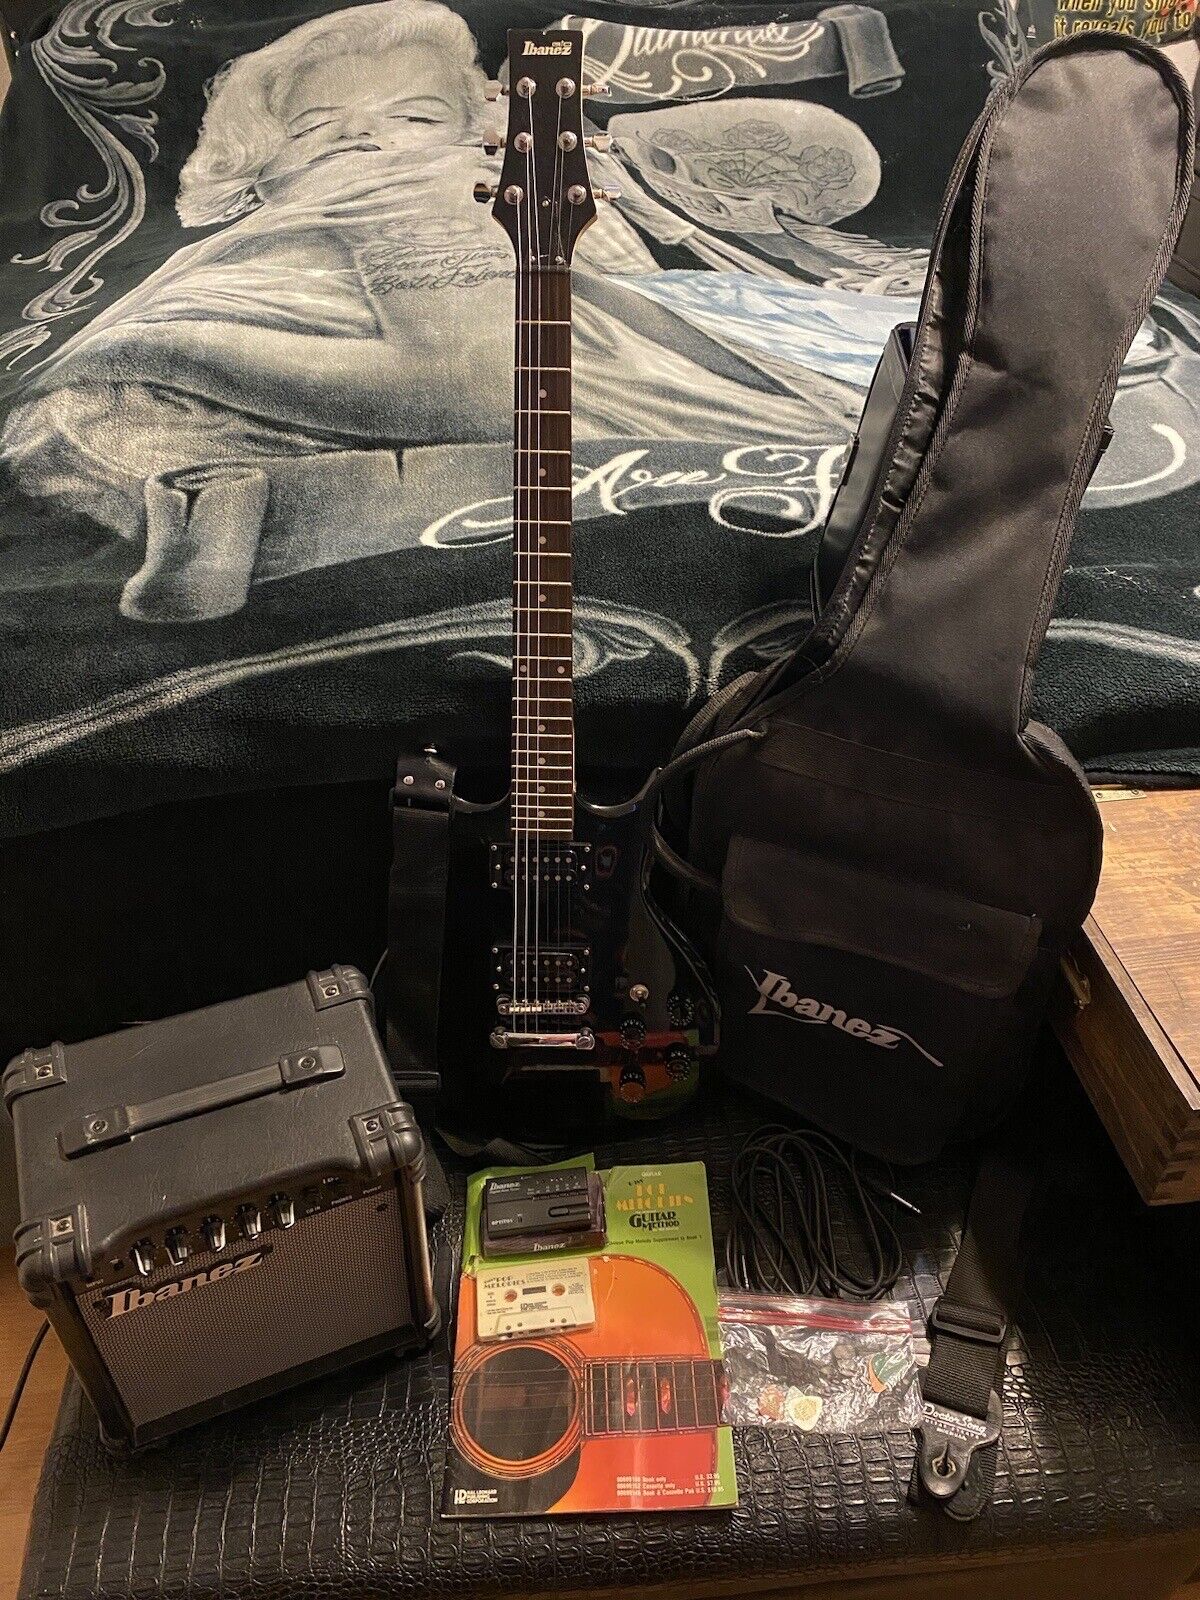 Ibanez Gio GAX 70 Electric Guitar, Amp, Soft Case, Tuner, + Accessories Working